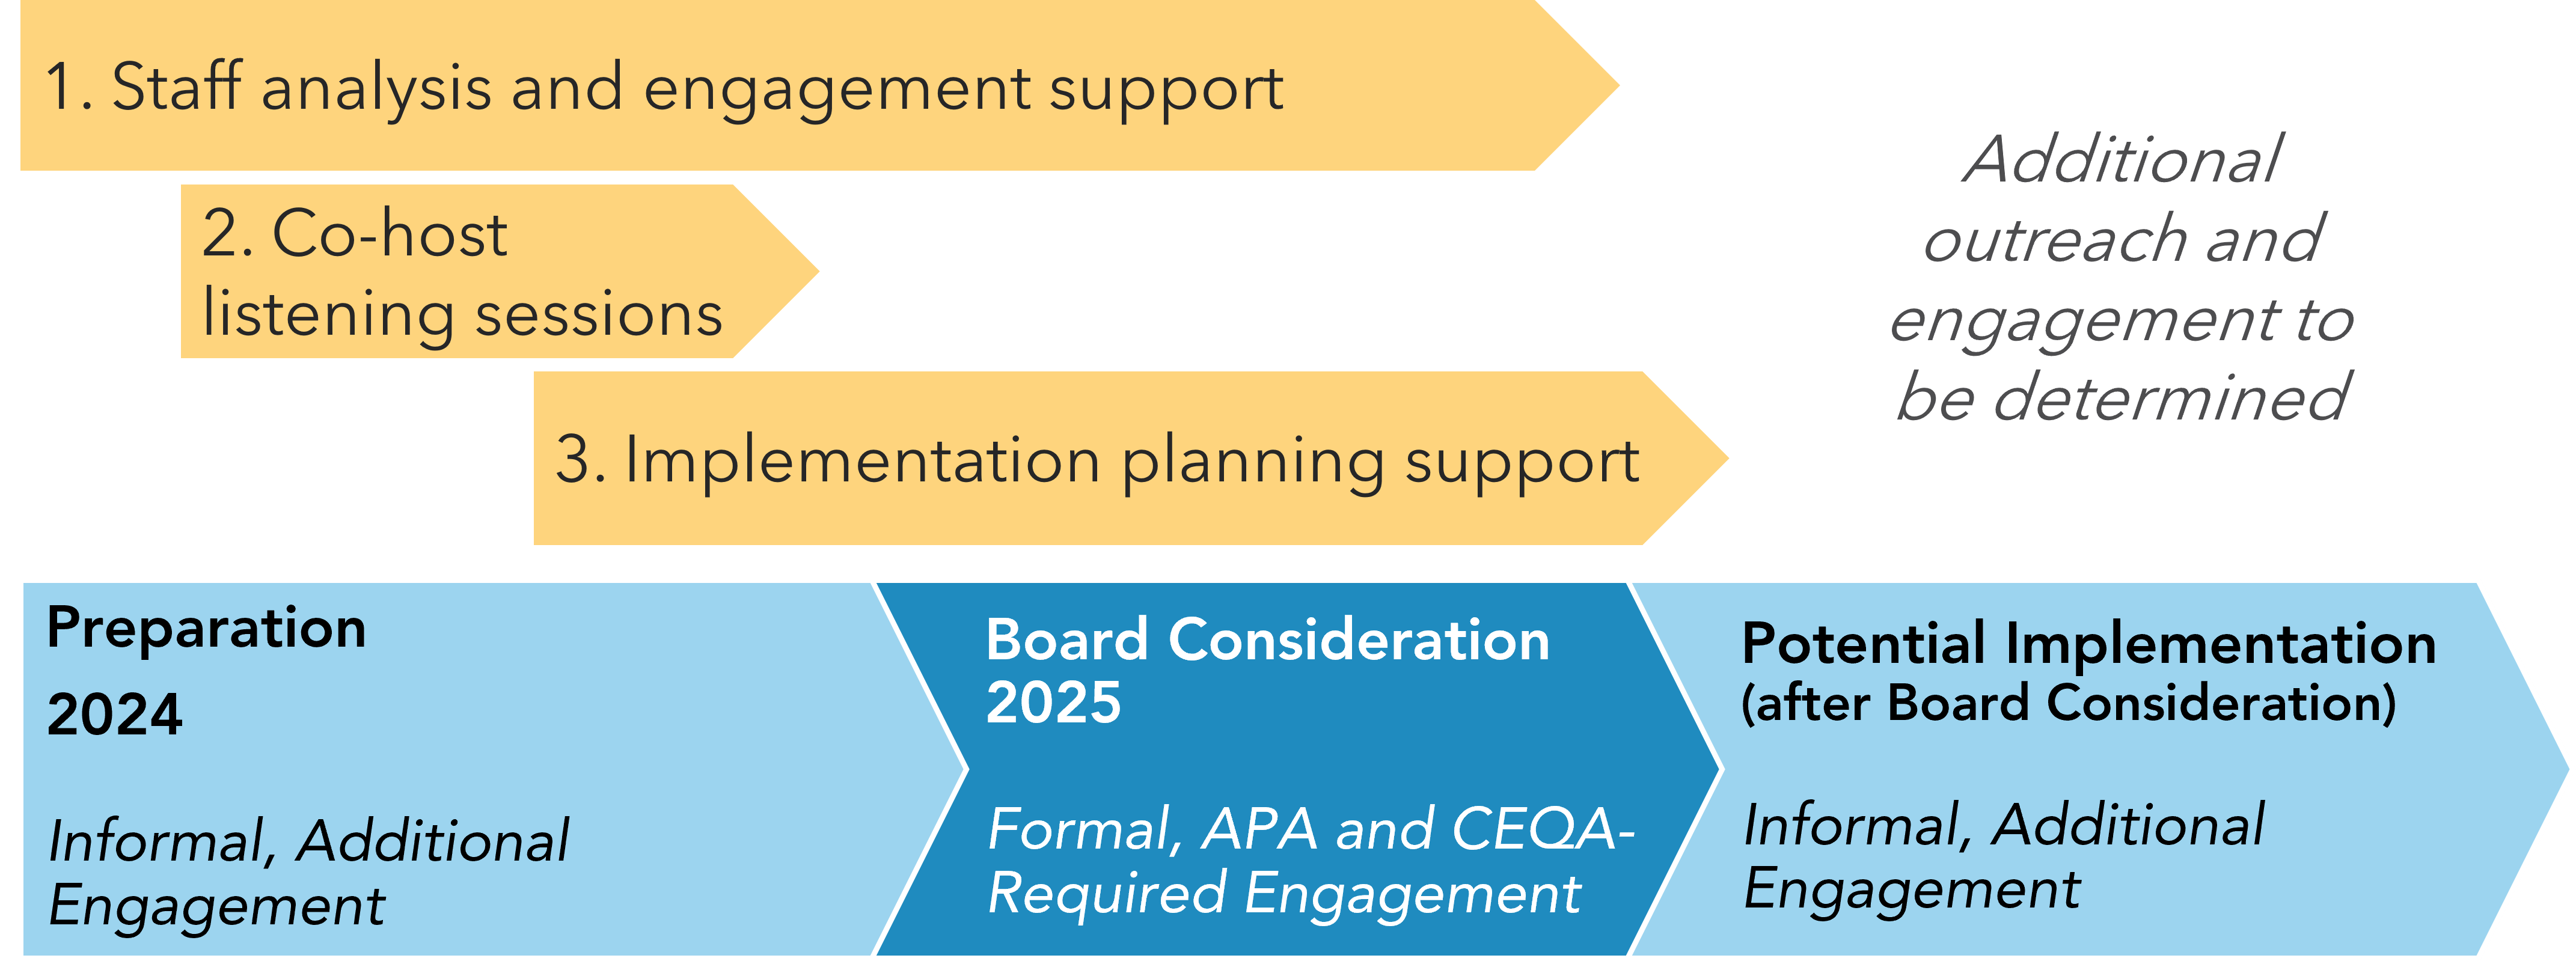 There are three phases: first, preparation (2024) during which there will be informal engagement. This will entail staff analysis and engagement support, co-hosted listening sessions, and implementation planning support. Second, Board consideration (2025) during which there will be formal, APA and CEQA-Required engagement. Third, there will be informal additional engagement to support implementation. 